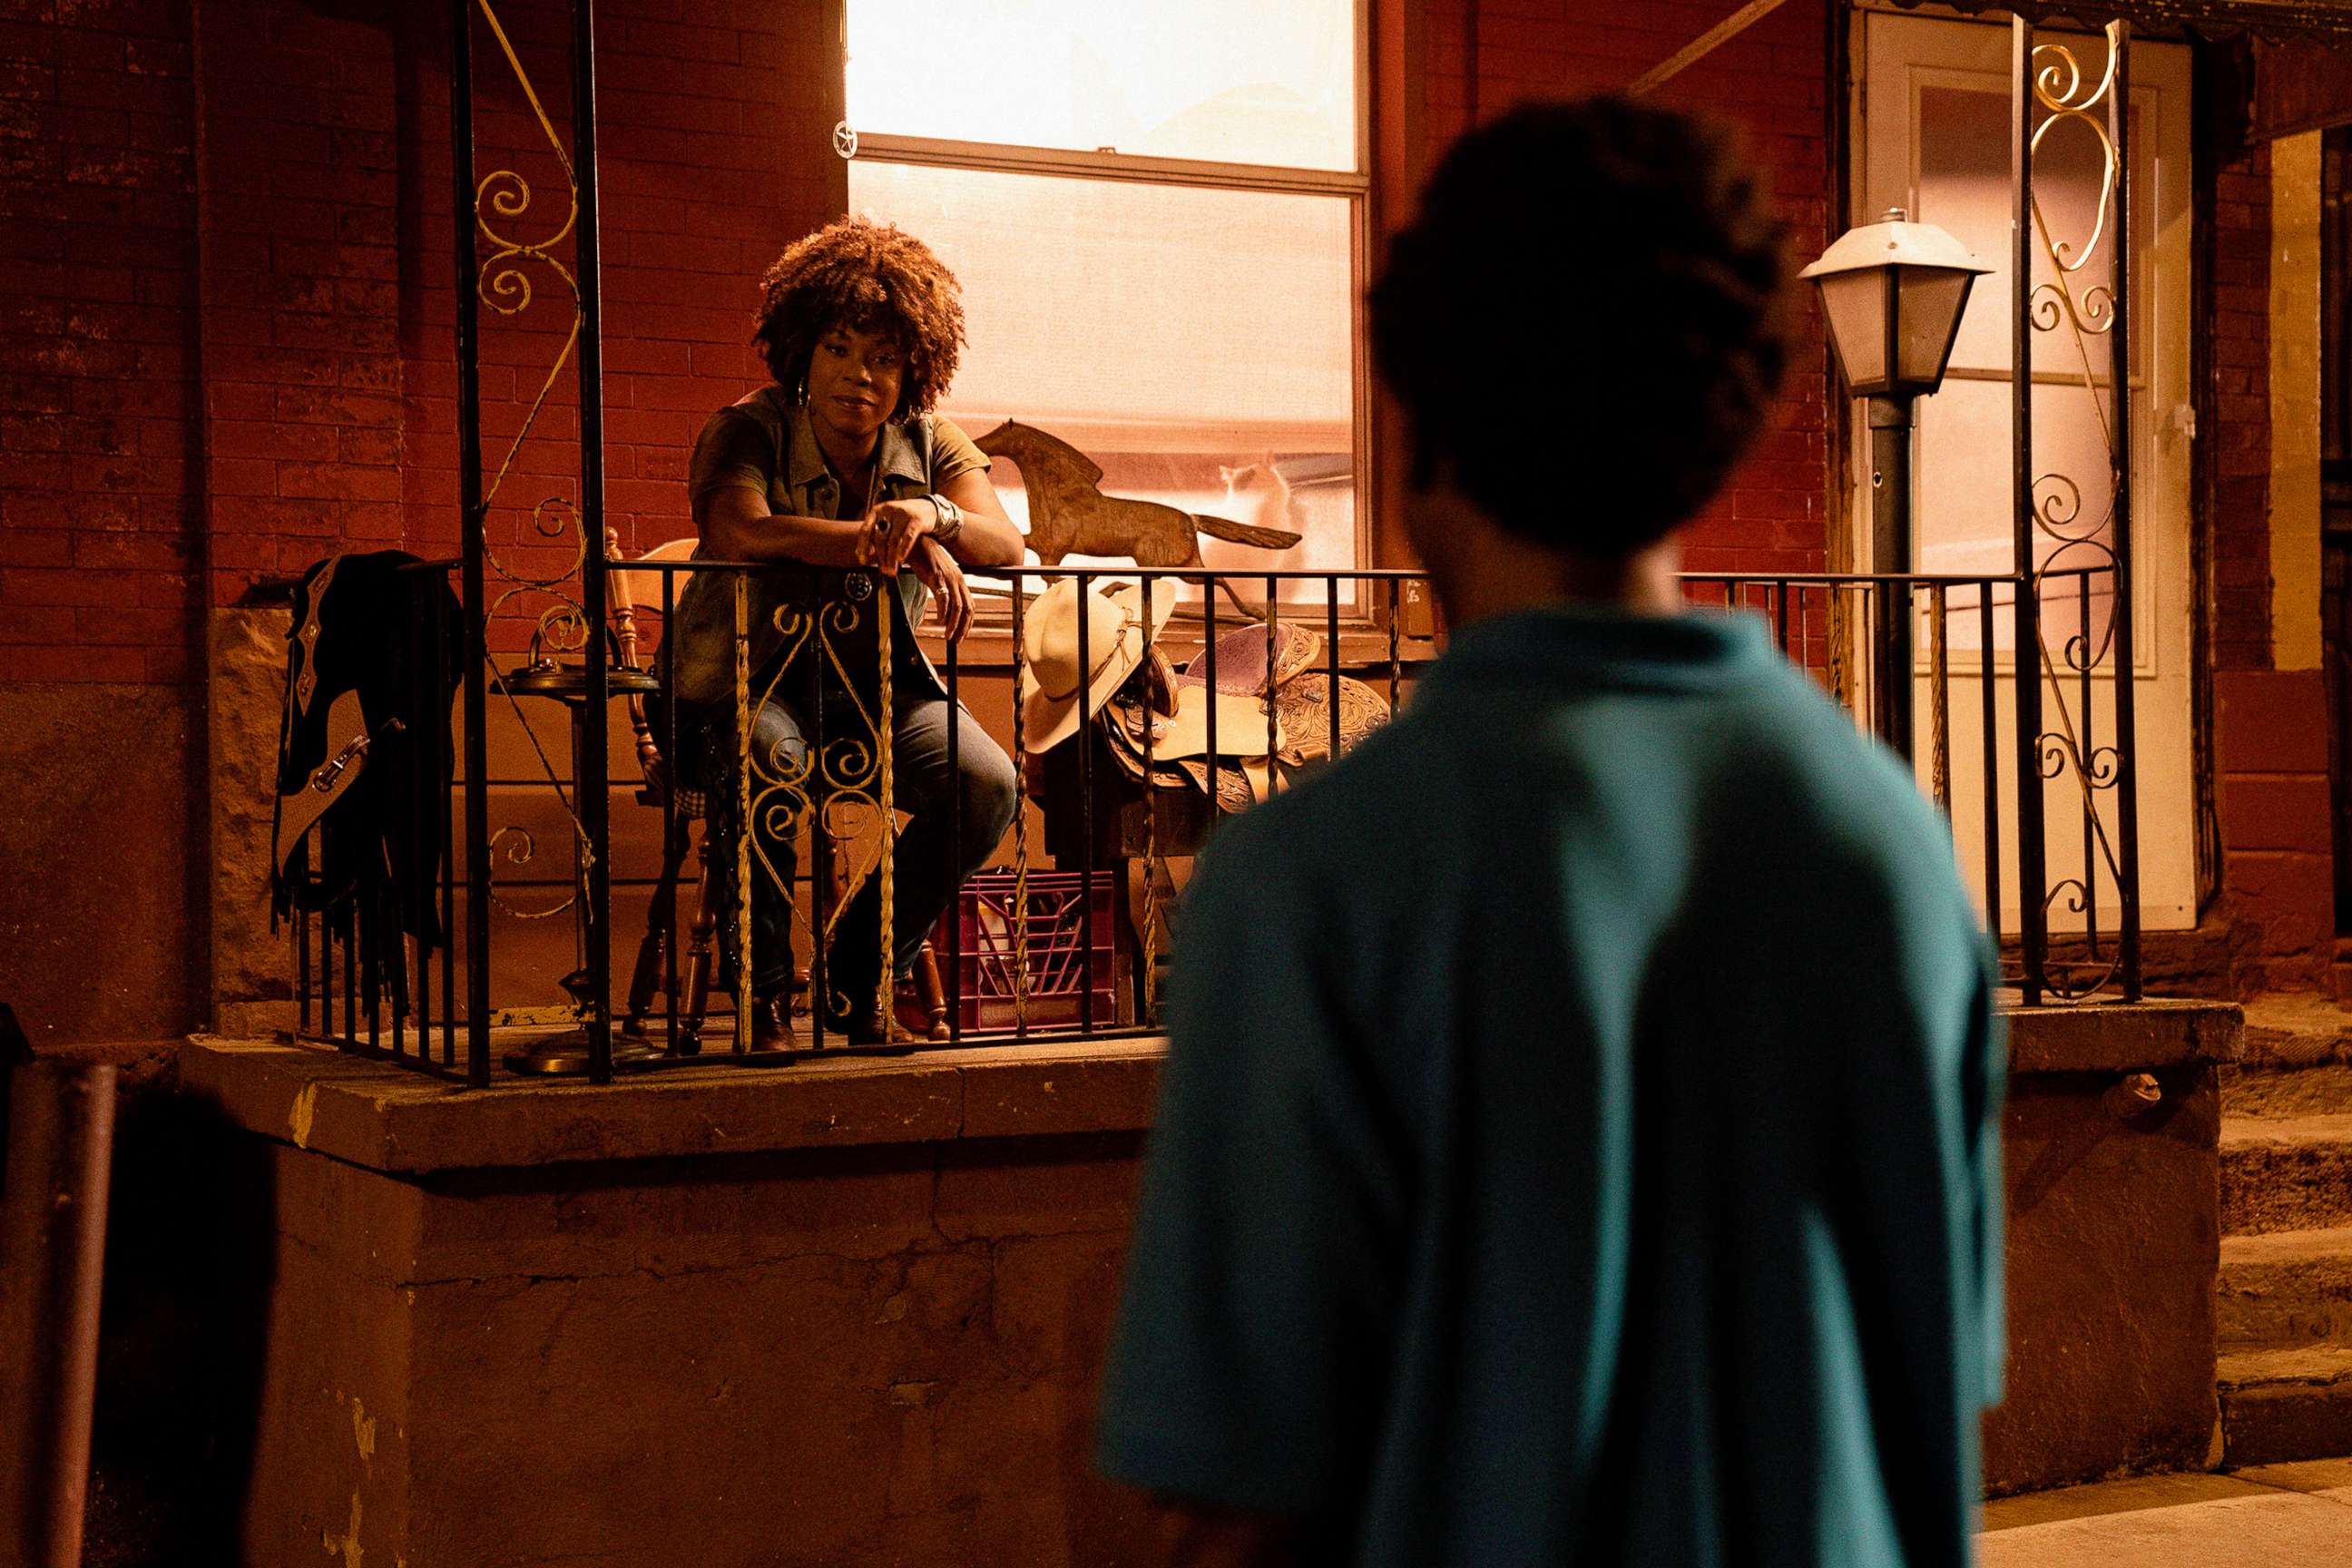 PHOTO: Lorraine Toussaint, left, and Caleb McLaughlin in a scene from  "Concrete Cowboys."